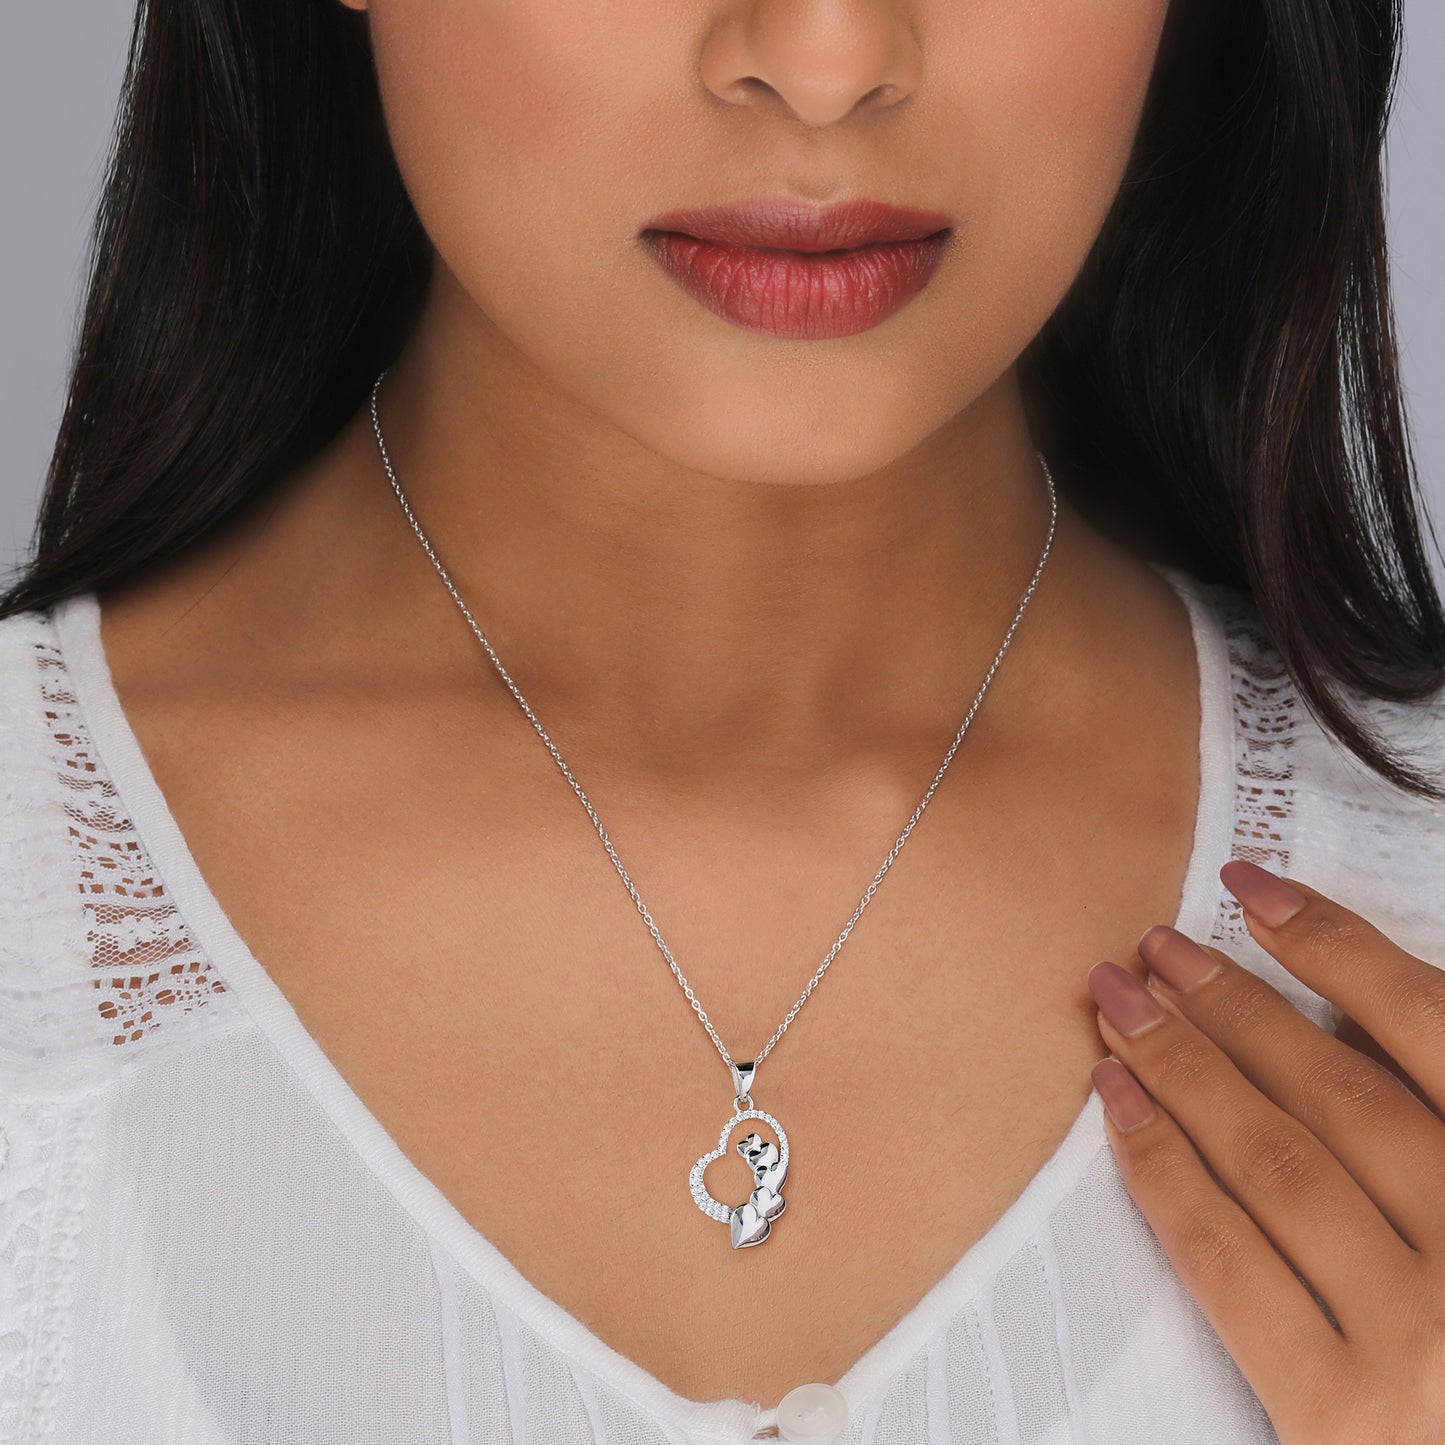 Silver Heart Rivulet Pendant With Link Chain